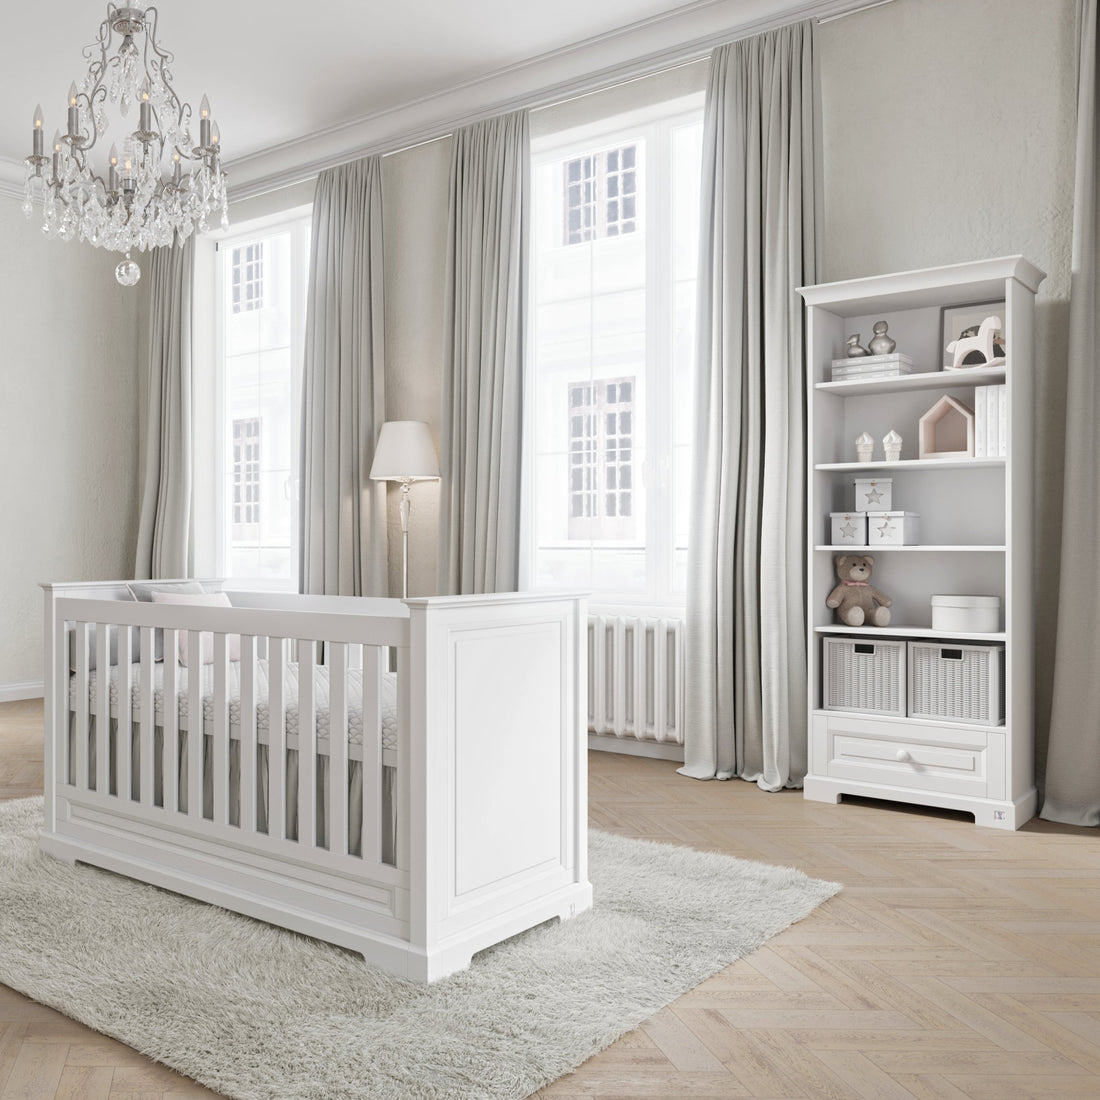 Bookcase ROYAL with drawer in classic design | Bookcase for baby room | Bookcase 205cm | White bookcase children room